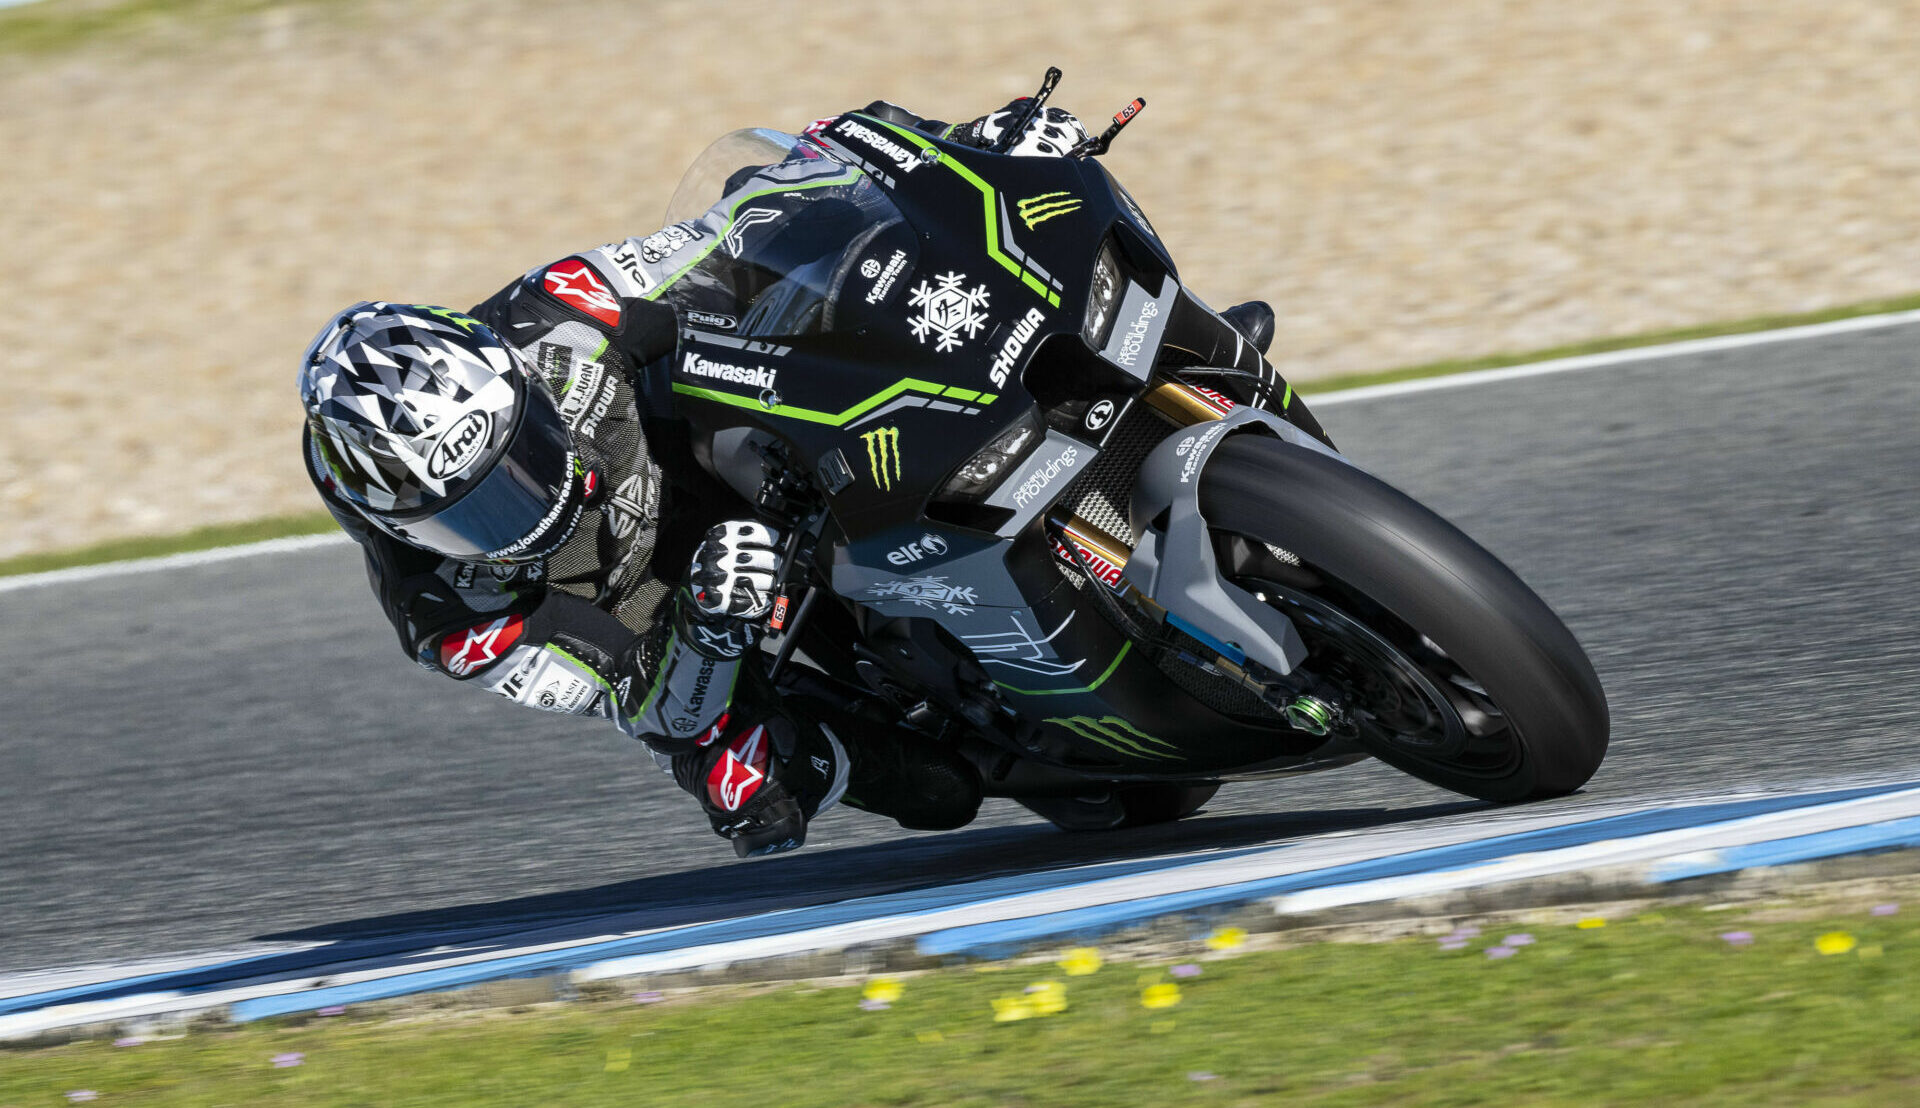 Jonathan Rea, seen here during testing at Jerez, has two new electronics specialists on his crew for 2023. Photo courtesy Kawasaki.